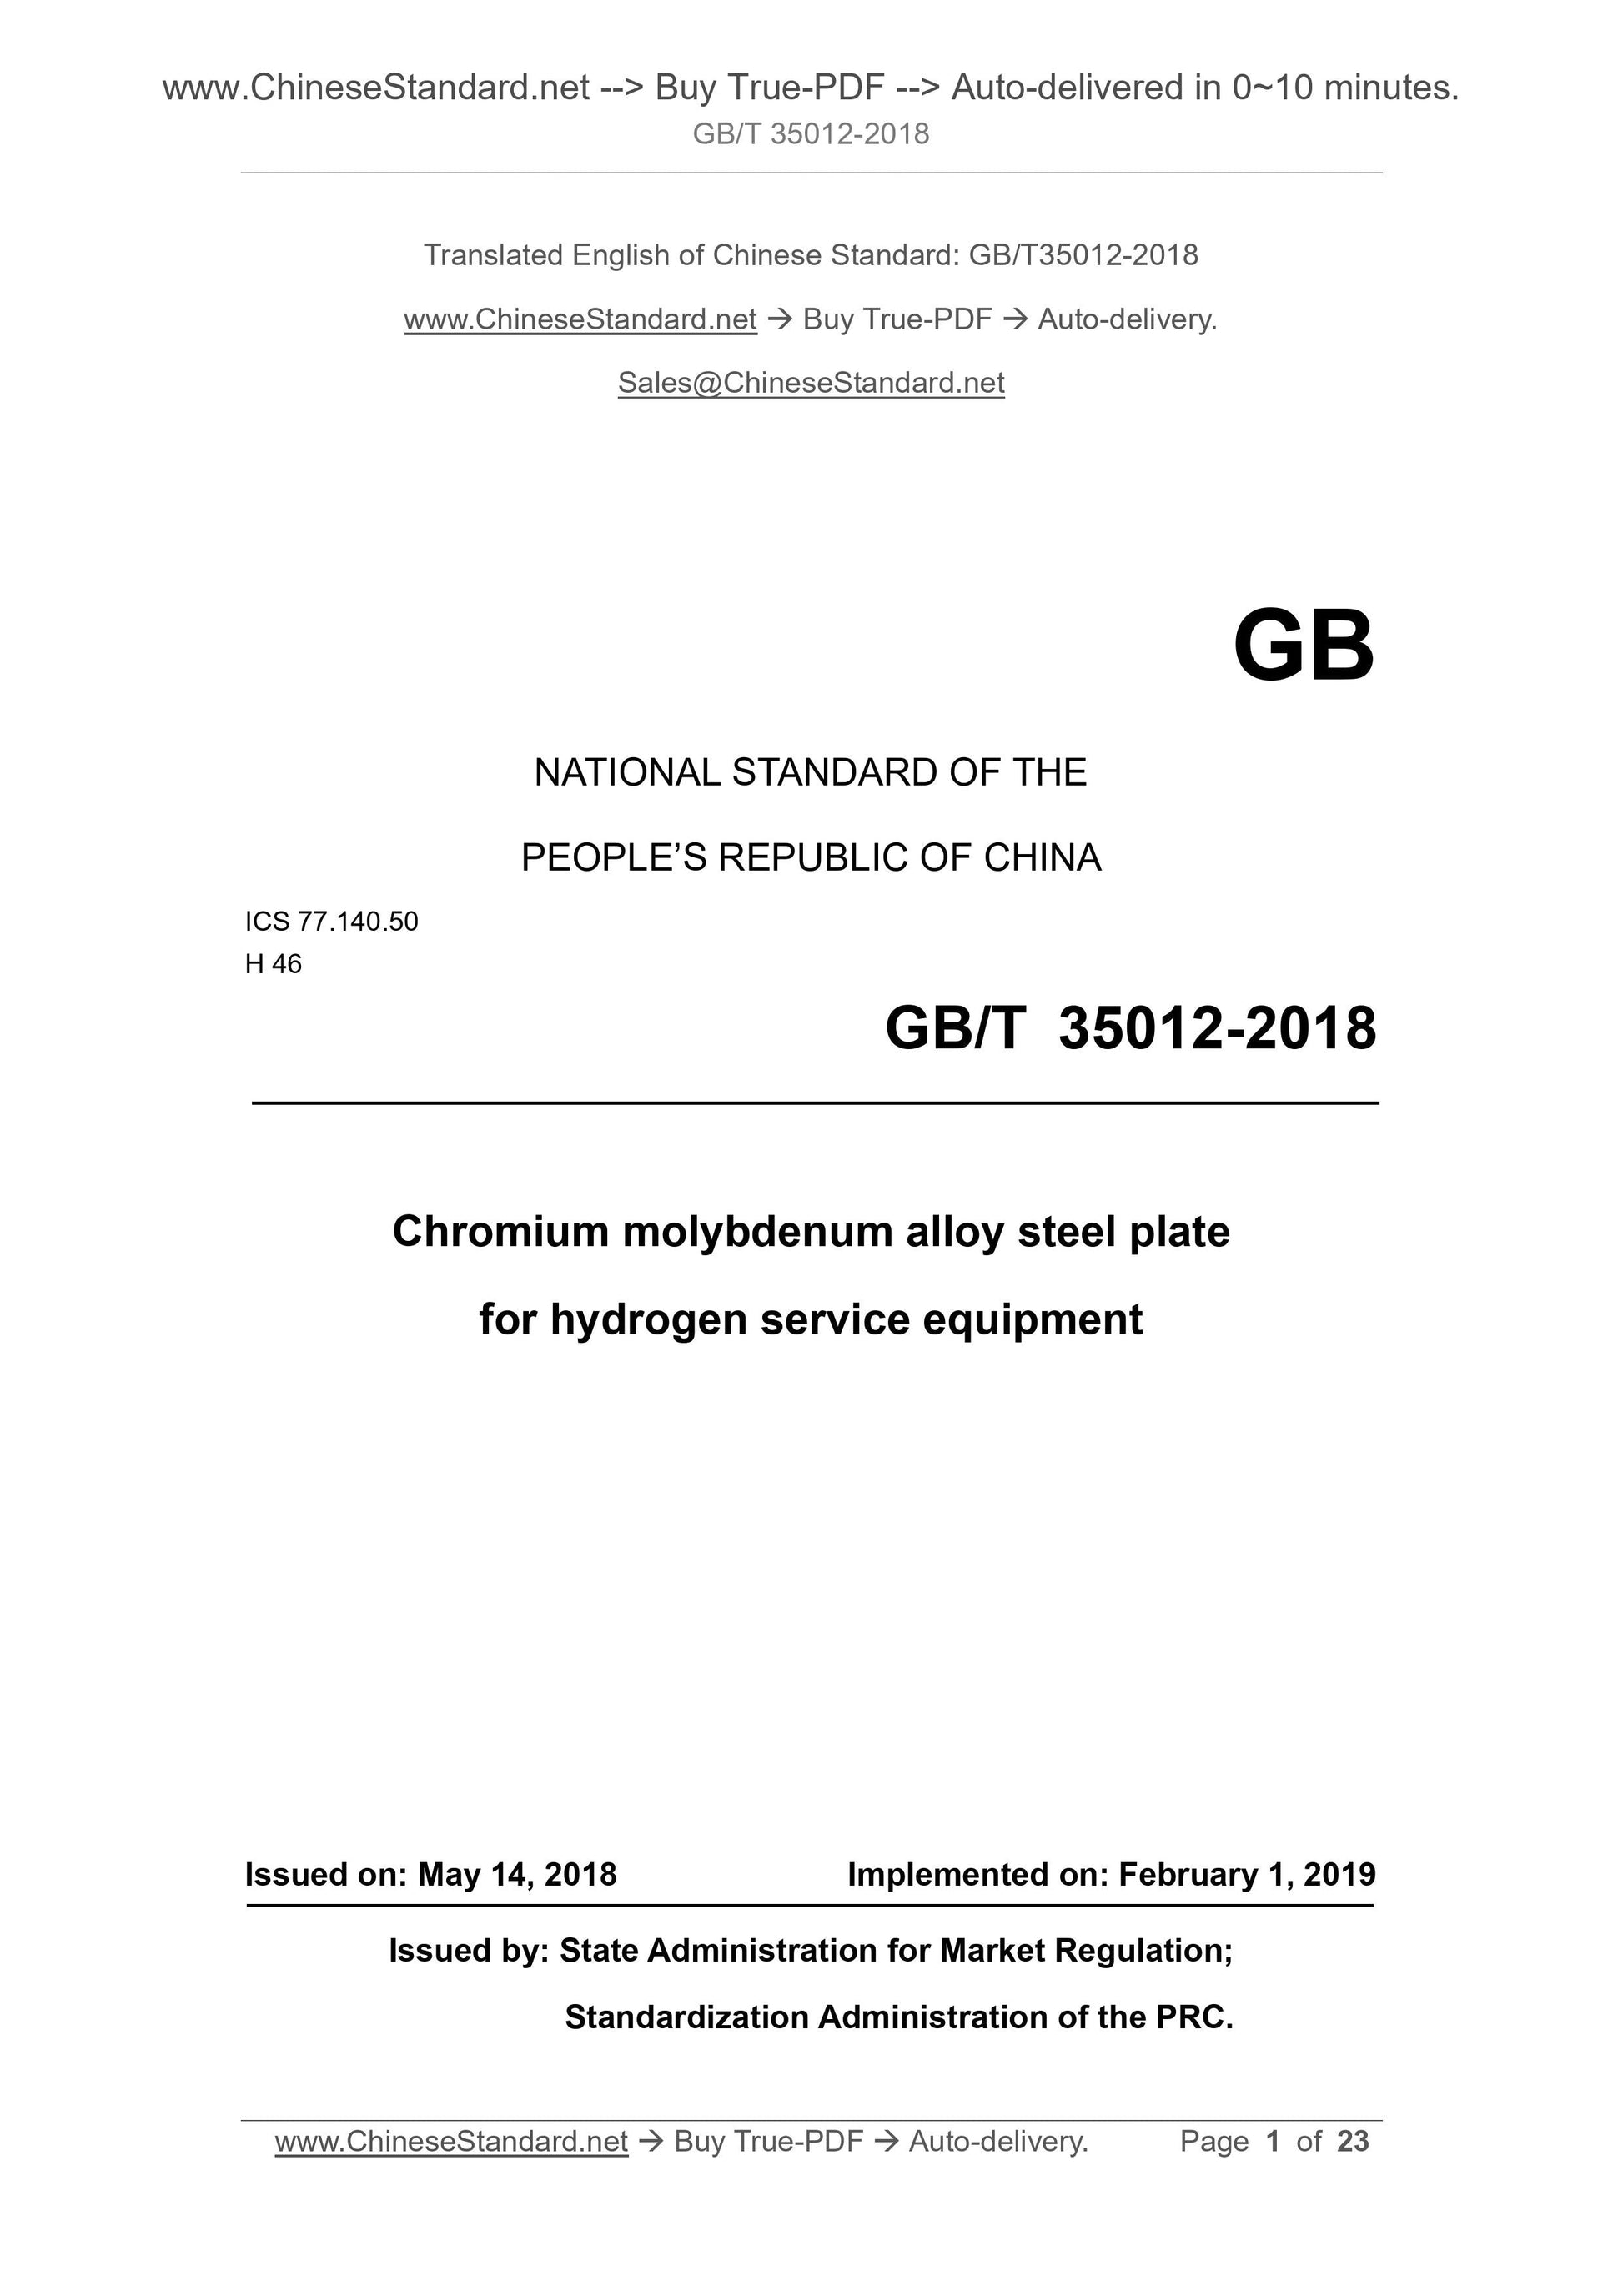 GB/T 35012-2018 Page 1